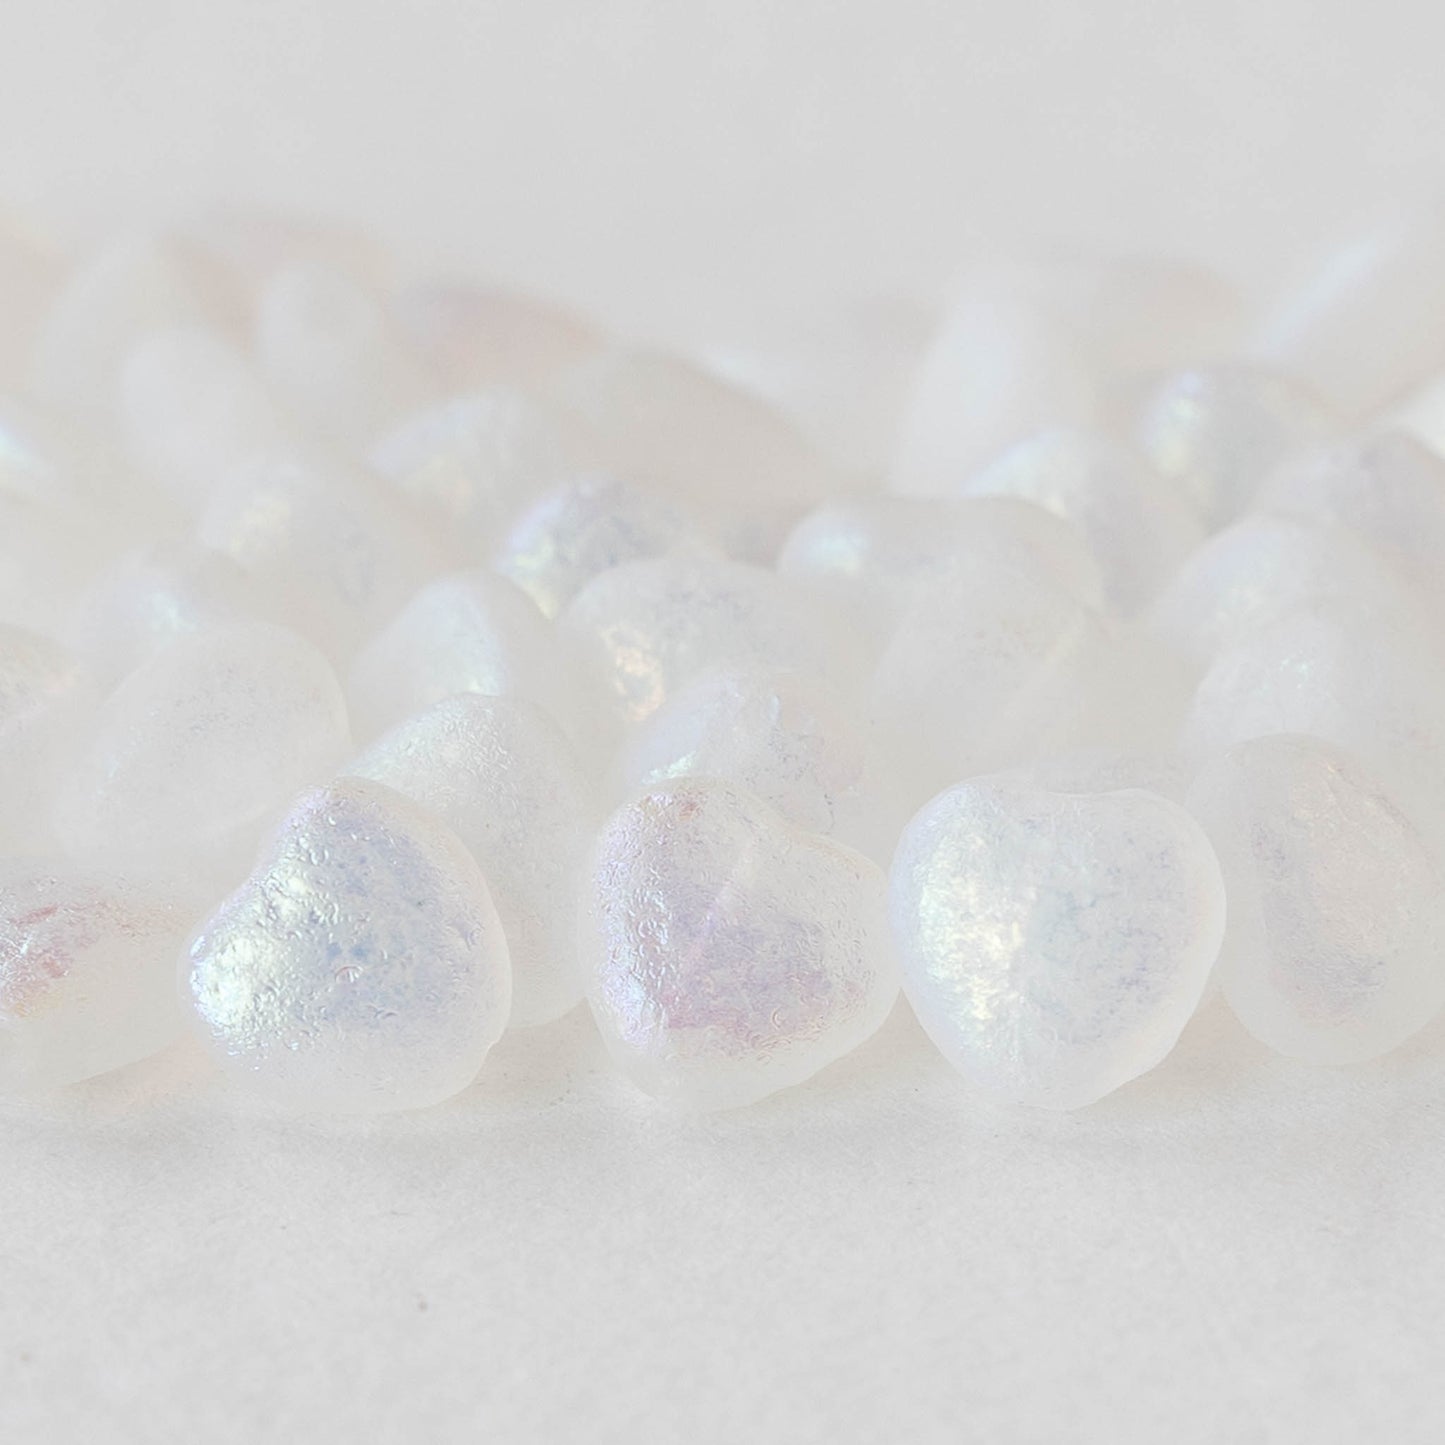 8mm Heart Bead - Etched Crystal AB - 20